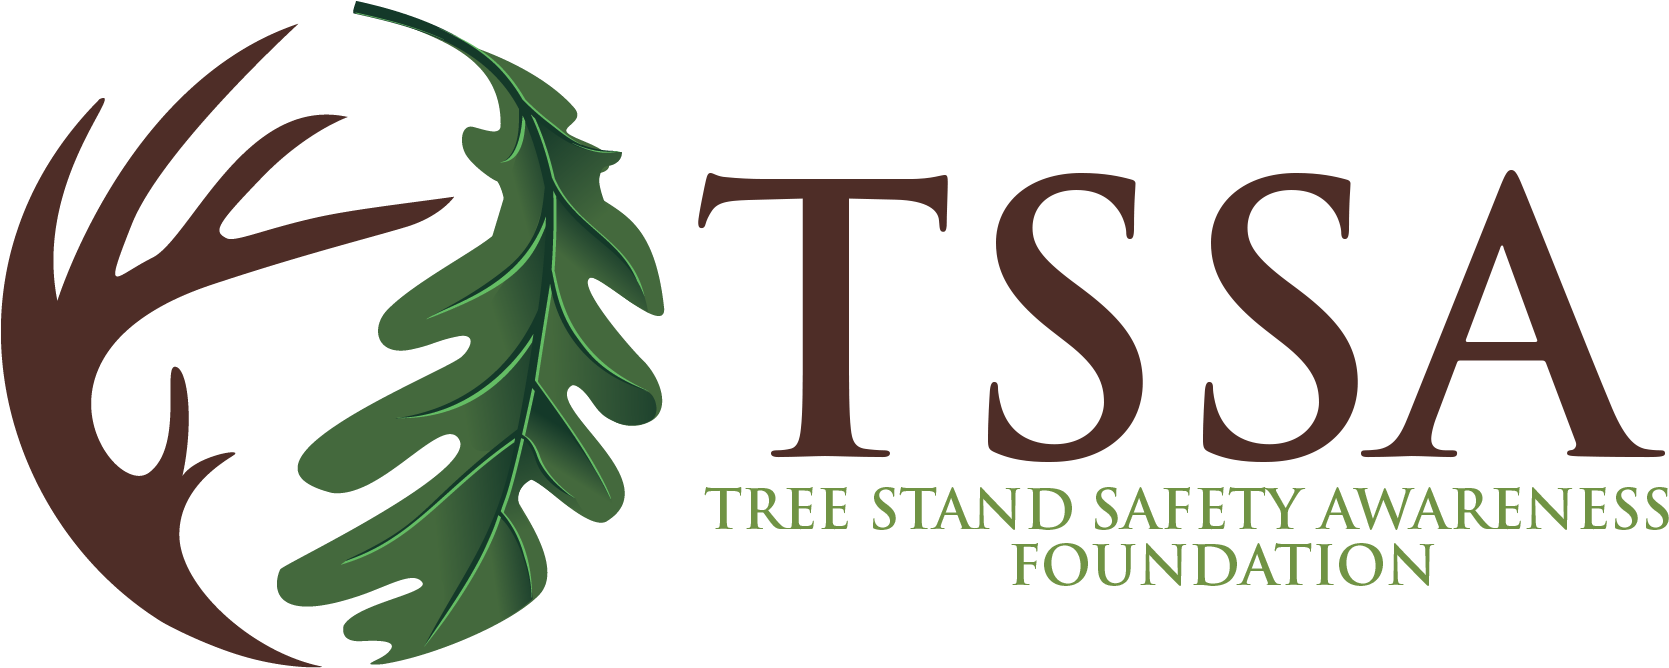 Elevating Tree Stand Safety - University Of Texas Pan American (1800x900)